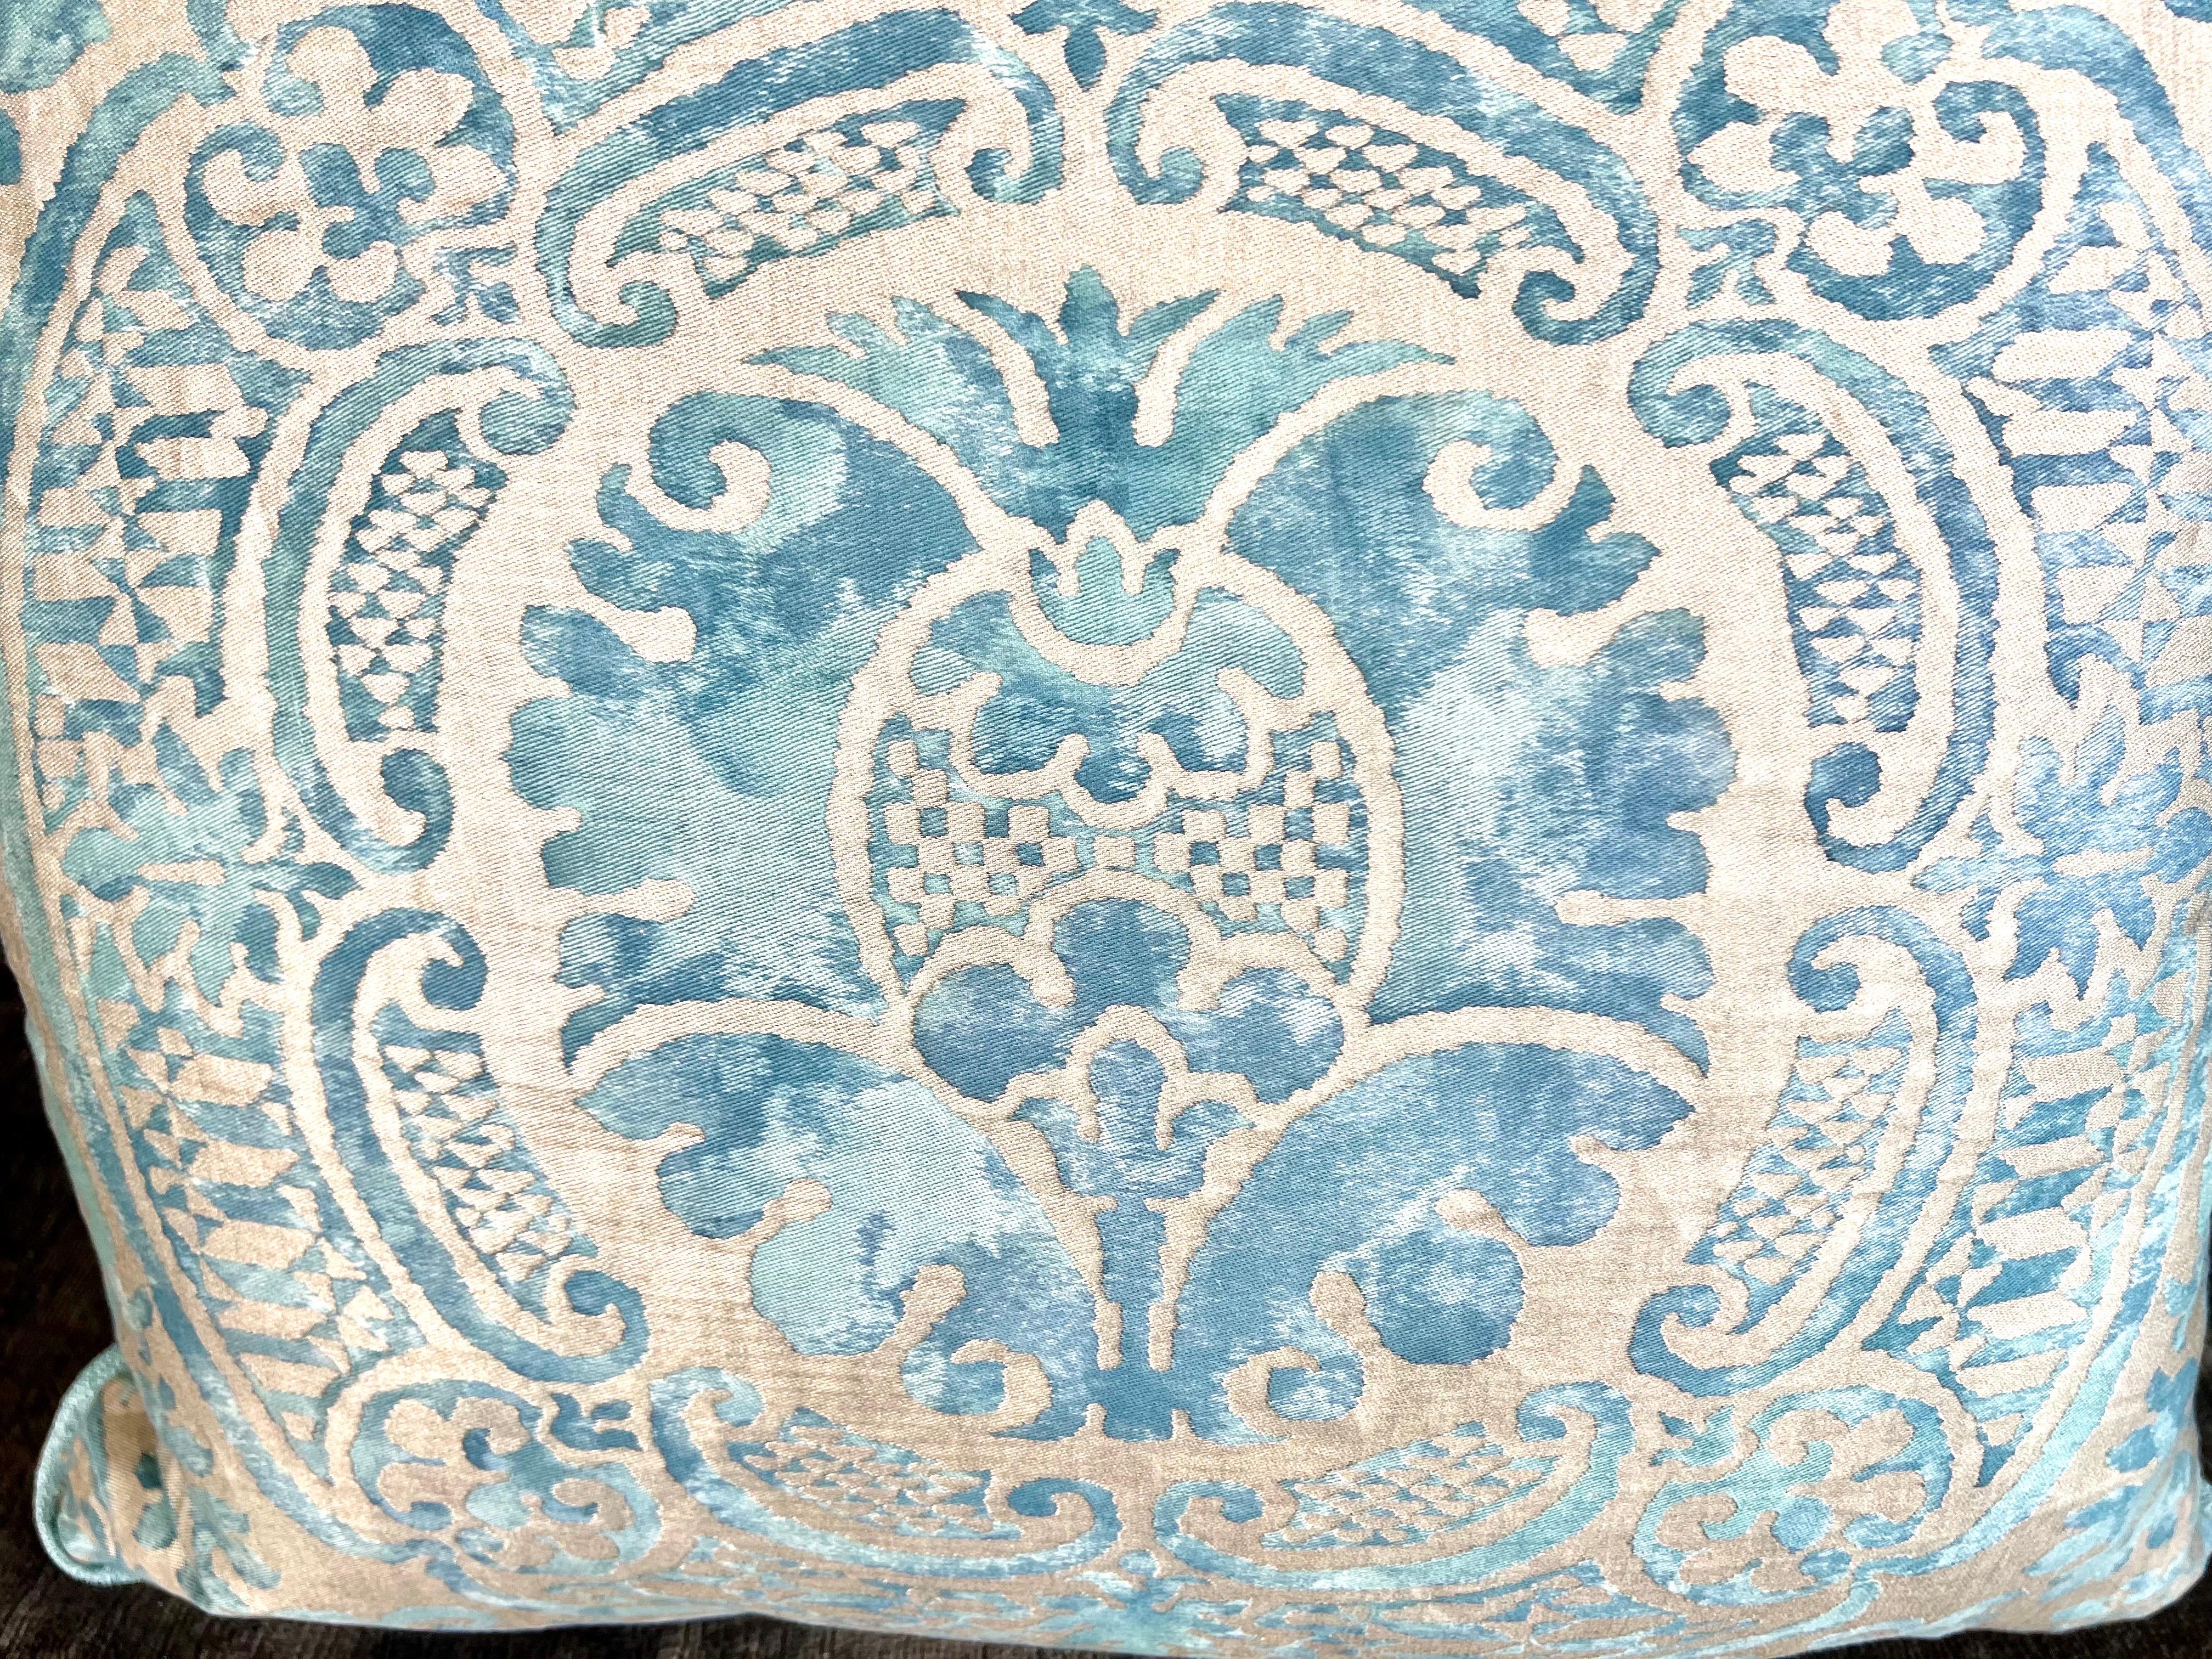 Mid-20th century Fortuny textile pillows in the Orsini Pattern.  The various shades of blues blending on a silver gold background create a mesmerizing watercolor effect.  The soft silvery blue velvet back add to the luxurious feel, white the